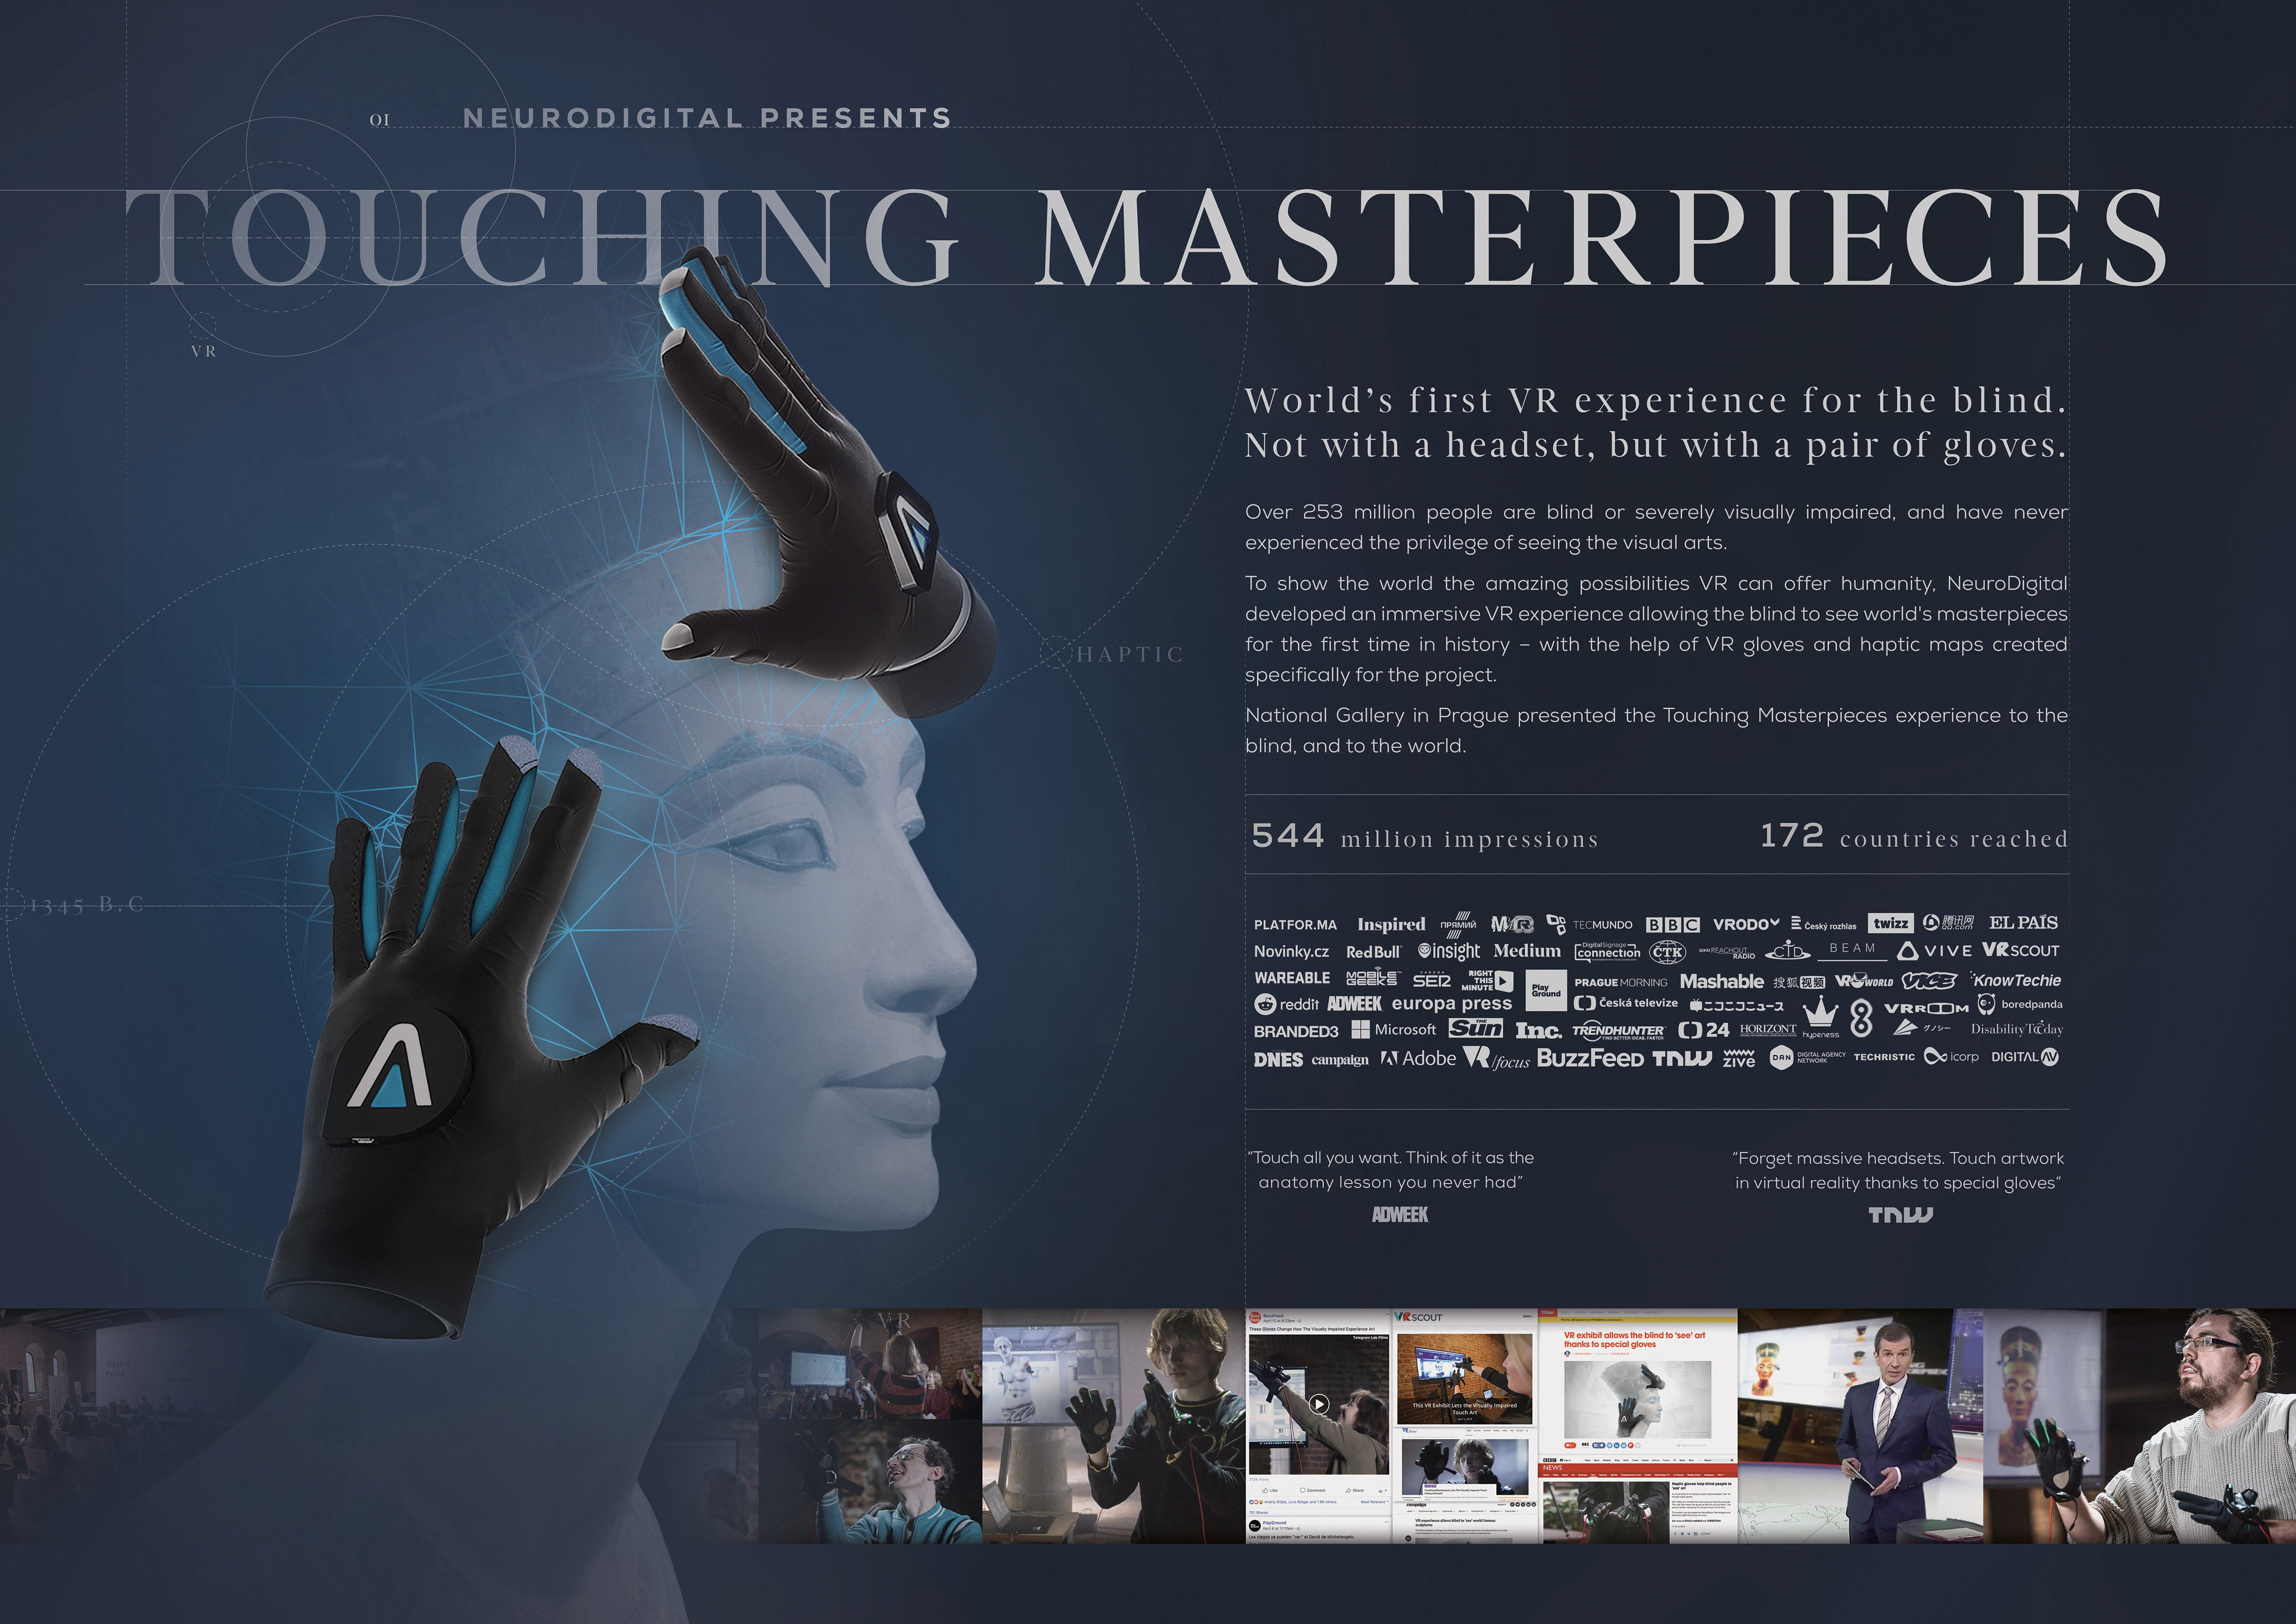 Touching Masterpieces